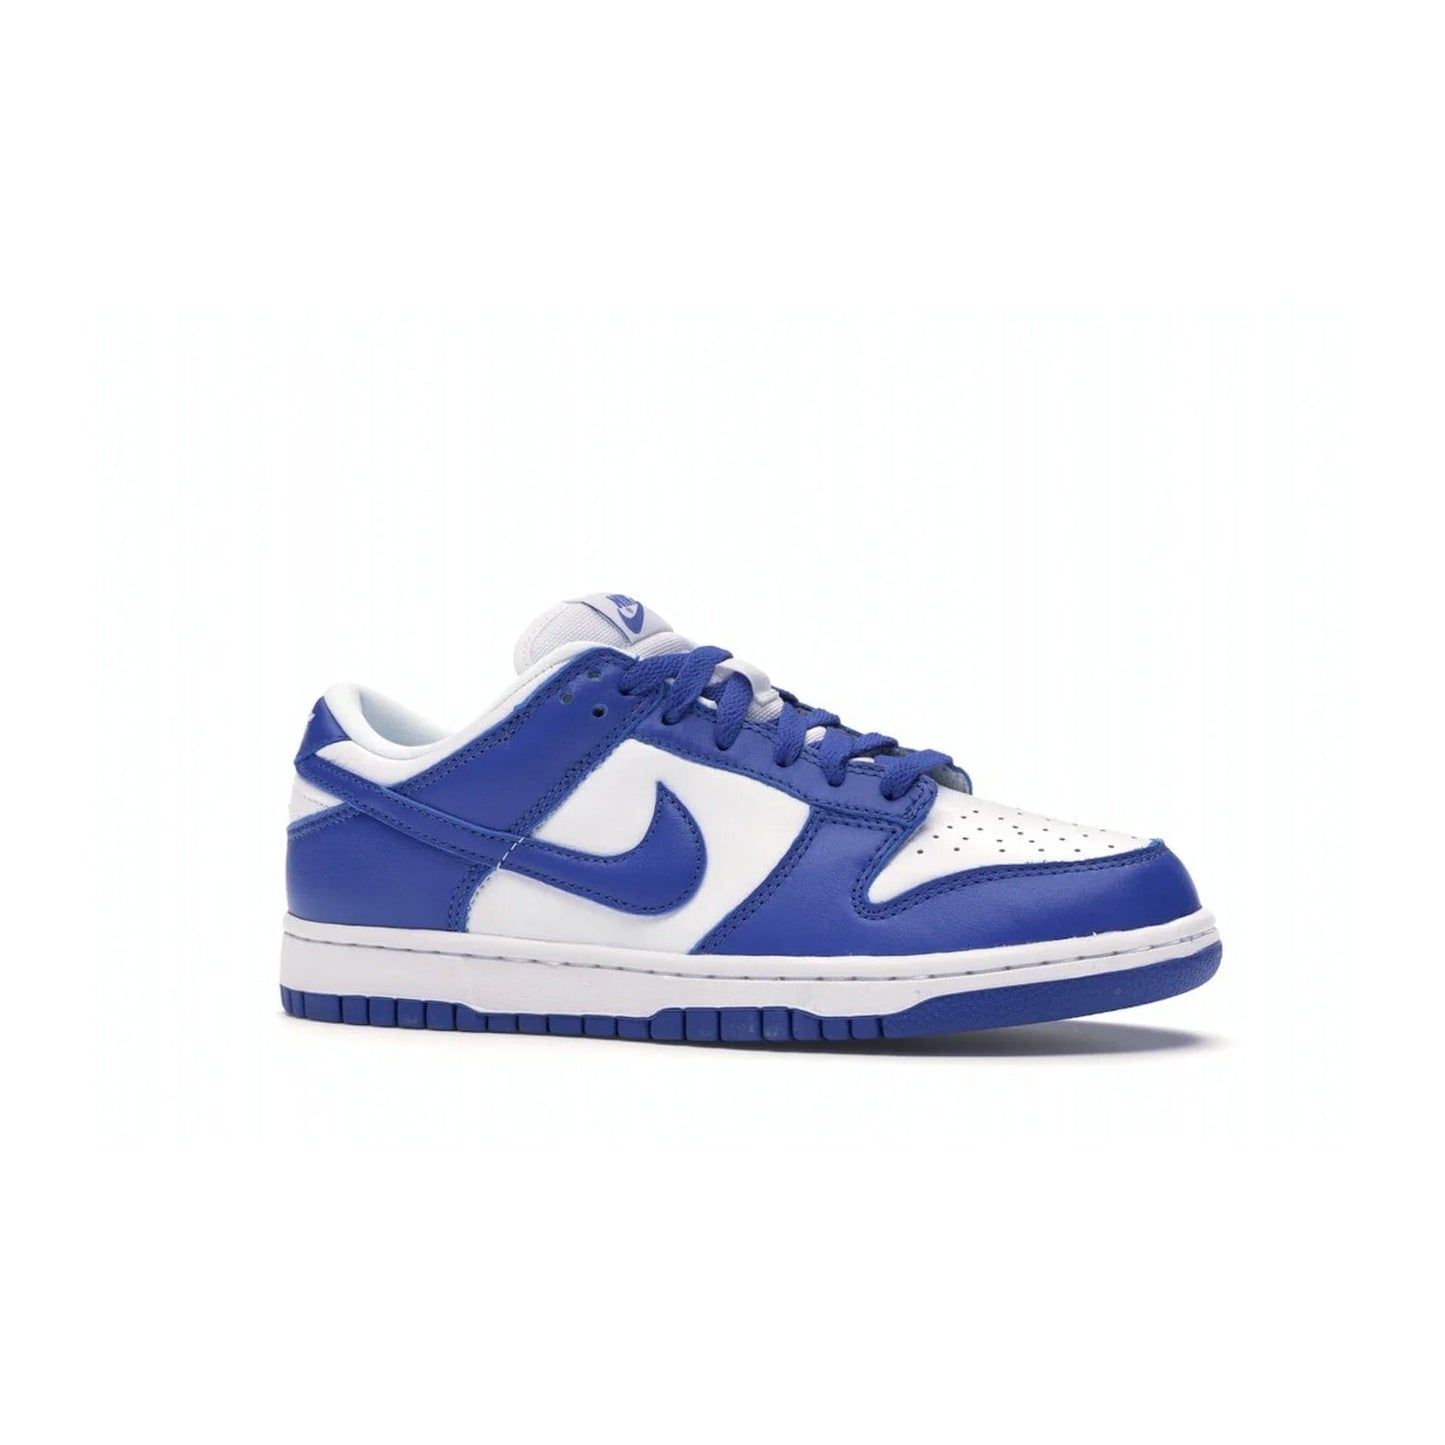 Nike Dunk Low SP Kentucky (2020/2022) - Image 3 - Only at www.BallersClubKickz.com - Classic Nike Dunk Low SP Kentucky with timeless White/Varsity Royal colorway. White leather upper, royal outsole, and Nike branding. A hit since March 2020 homage to the 1985 Nike College Colors program. Show your support with these classic kicks.